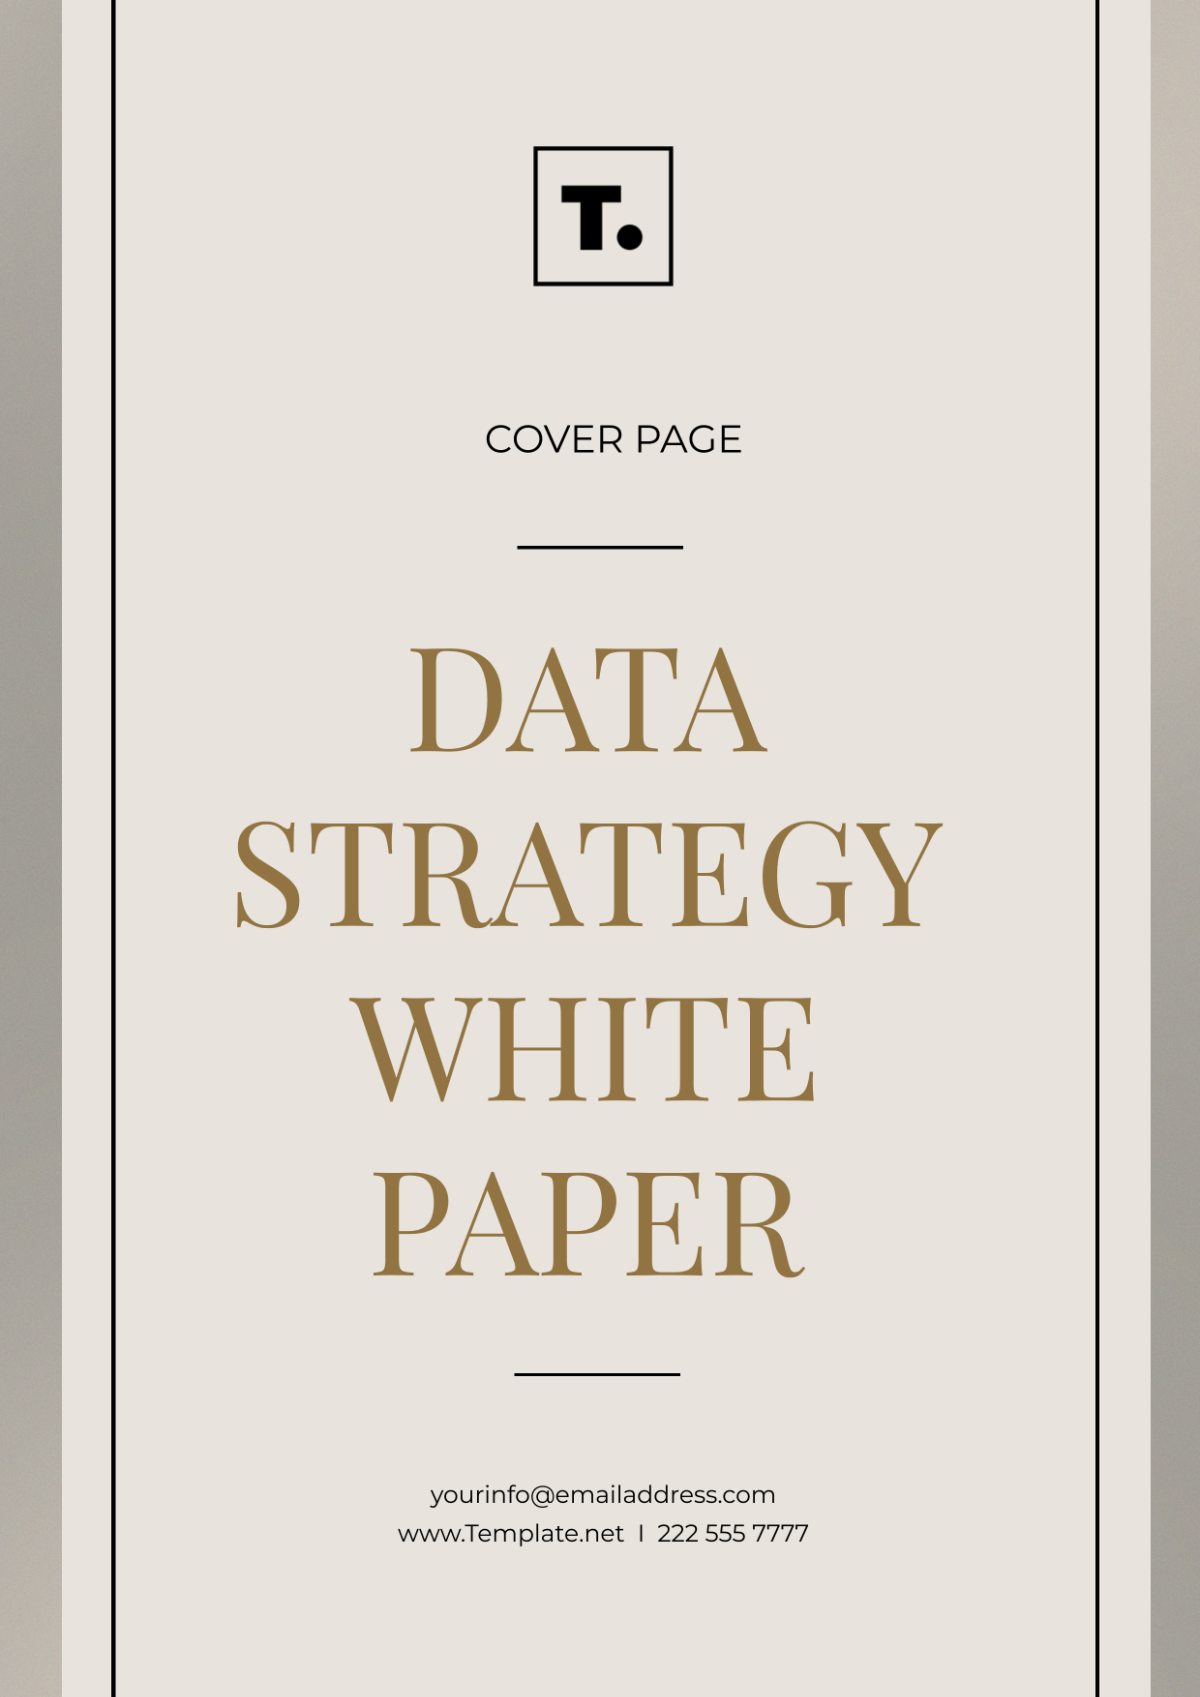 Data Strategy White Paper Cover Page